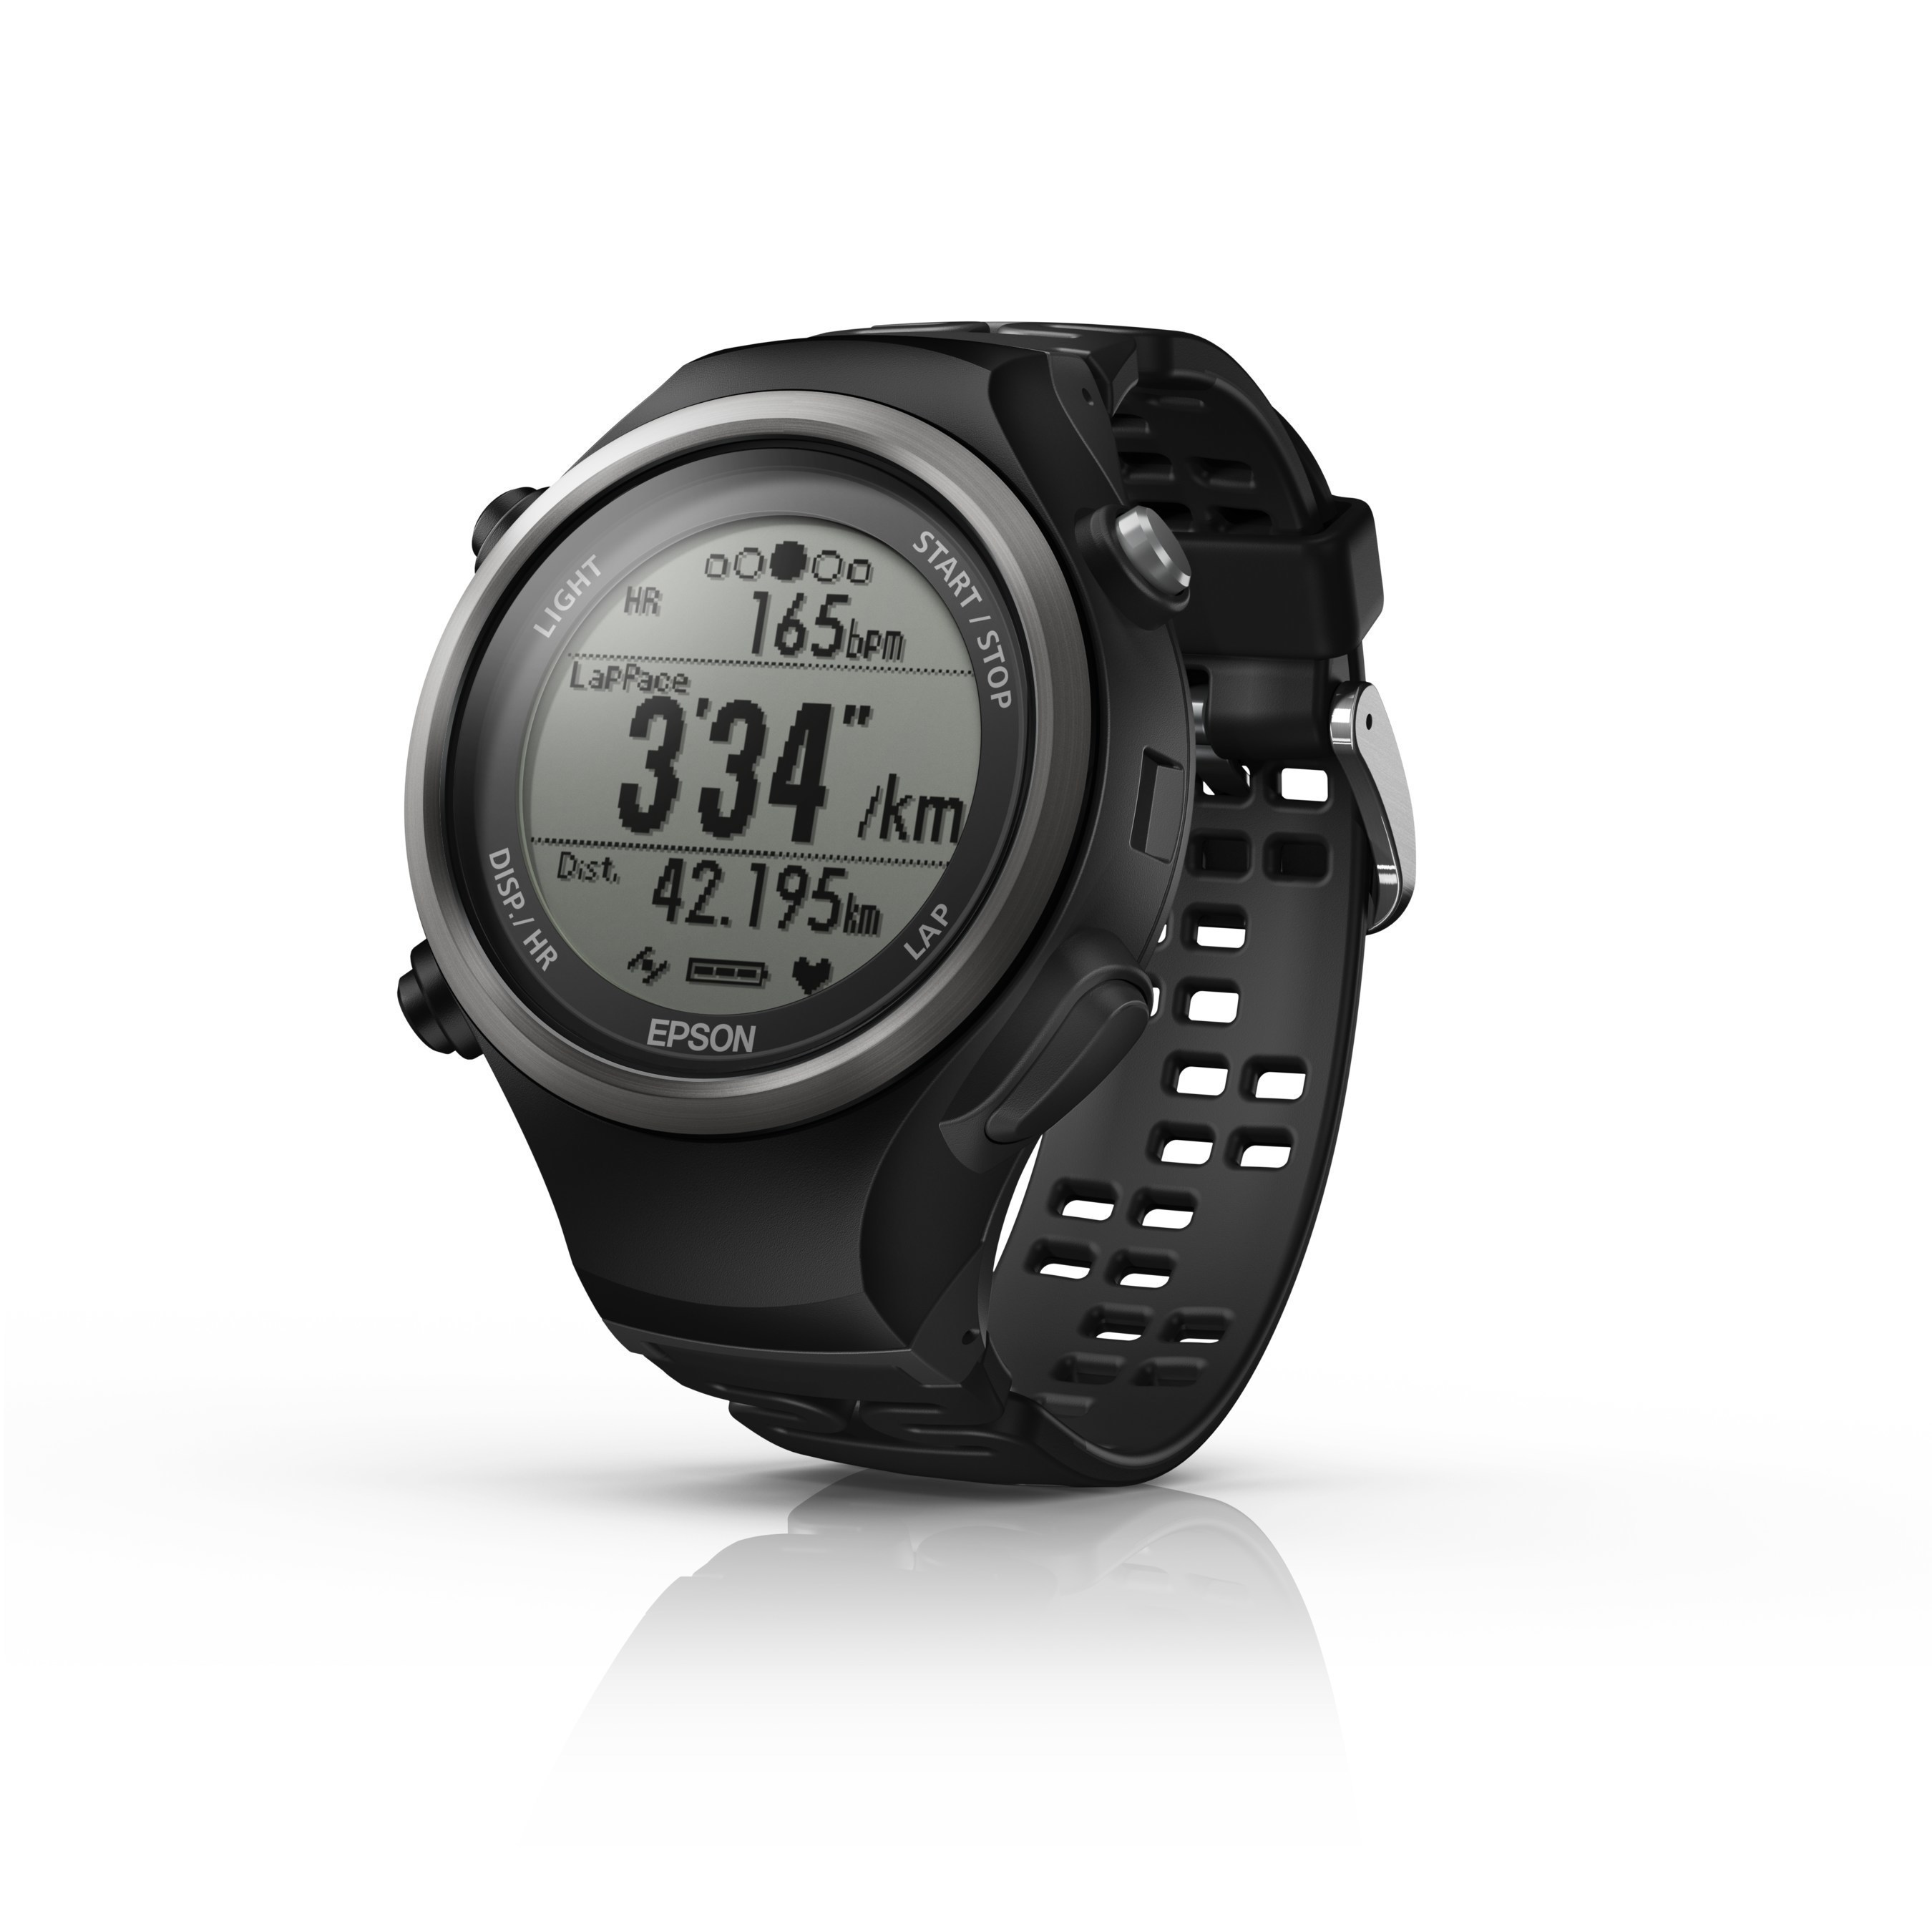 The Runsense SF-810 GPS Watch with wrist-mounted heart rate